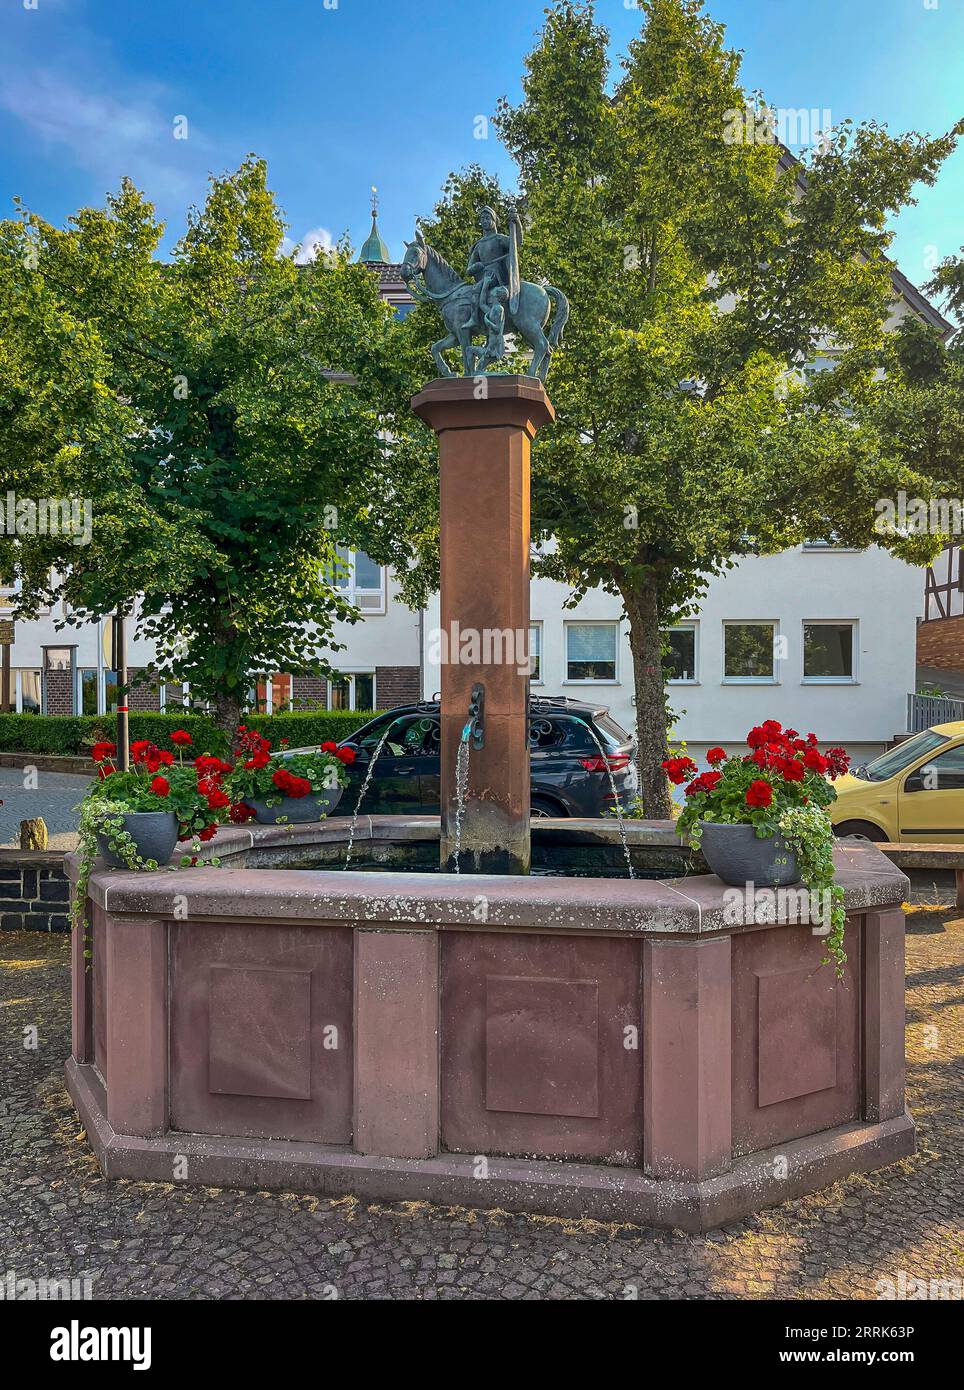 Amöneburg, Hesse, Germany - fountain at the market place in the old town. Amöneburg is a small town in the central Hessian district of Marburg-Biedenkopf. It is located on the 365 m high mountain Amöneburg with the castle Amöneburg at the top. Stock Photo